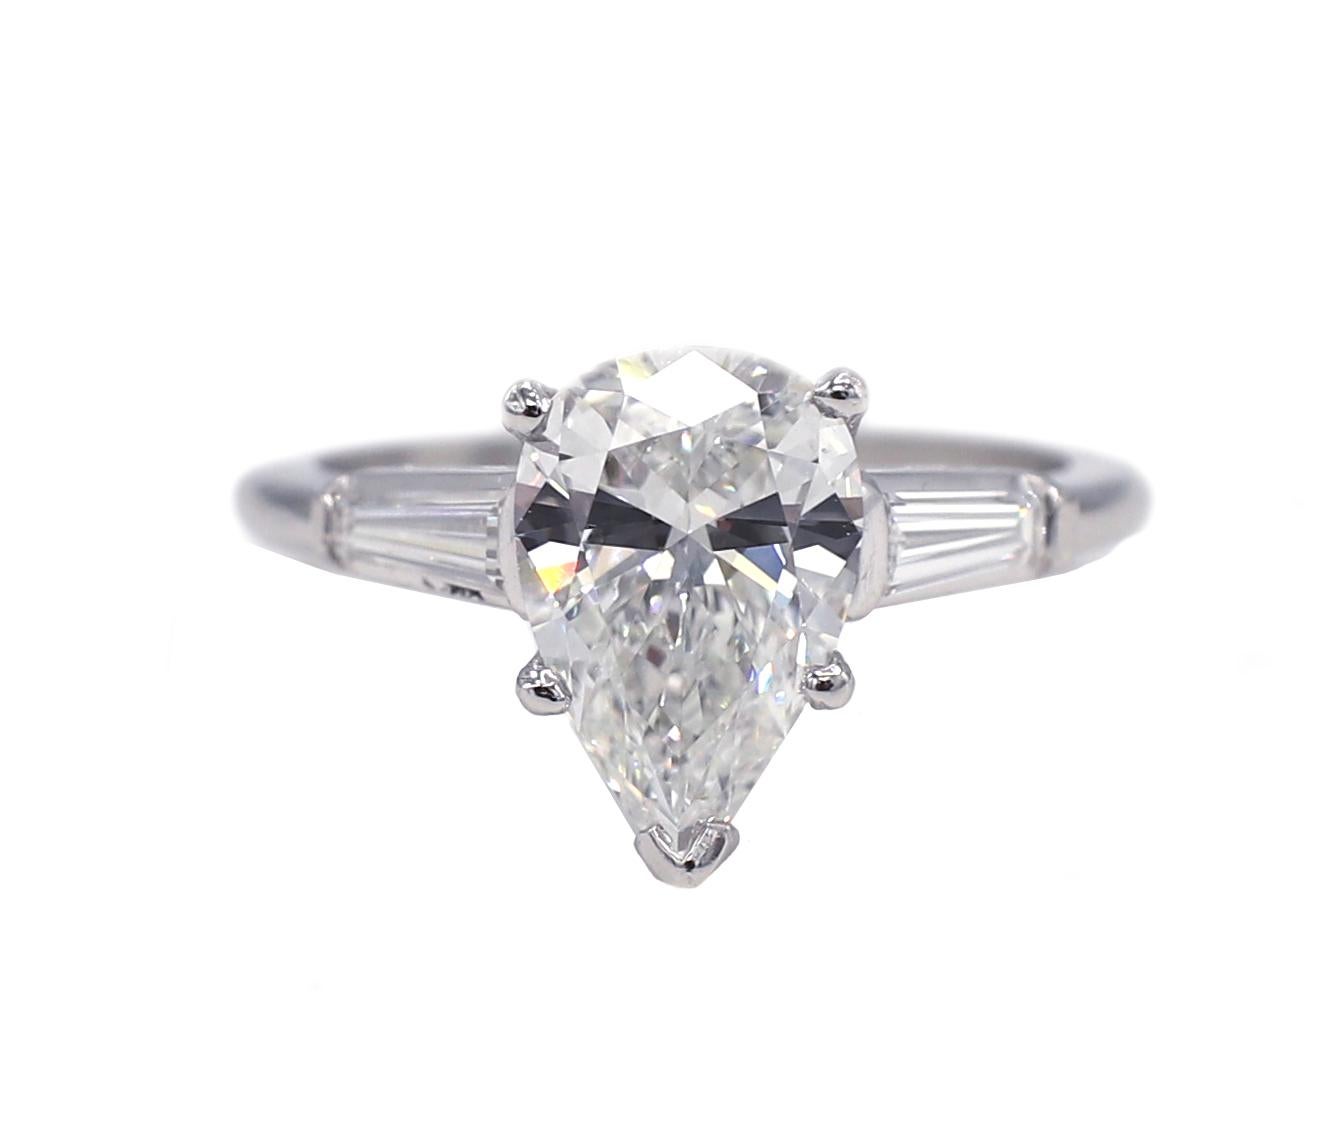 GIA Certified 2.20 Carat Pear Shape G SI1 Platinum Diamond Engagement Ring 
GIA report number: 6224336380
Diamond: 2.20 carat pear brilliant G SI1 
Accent diamonds: 2 tapered baguette diamonds, approx. .25 CTW G VS
Metal: Platinum
Weight: 5.11